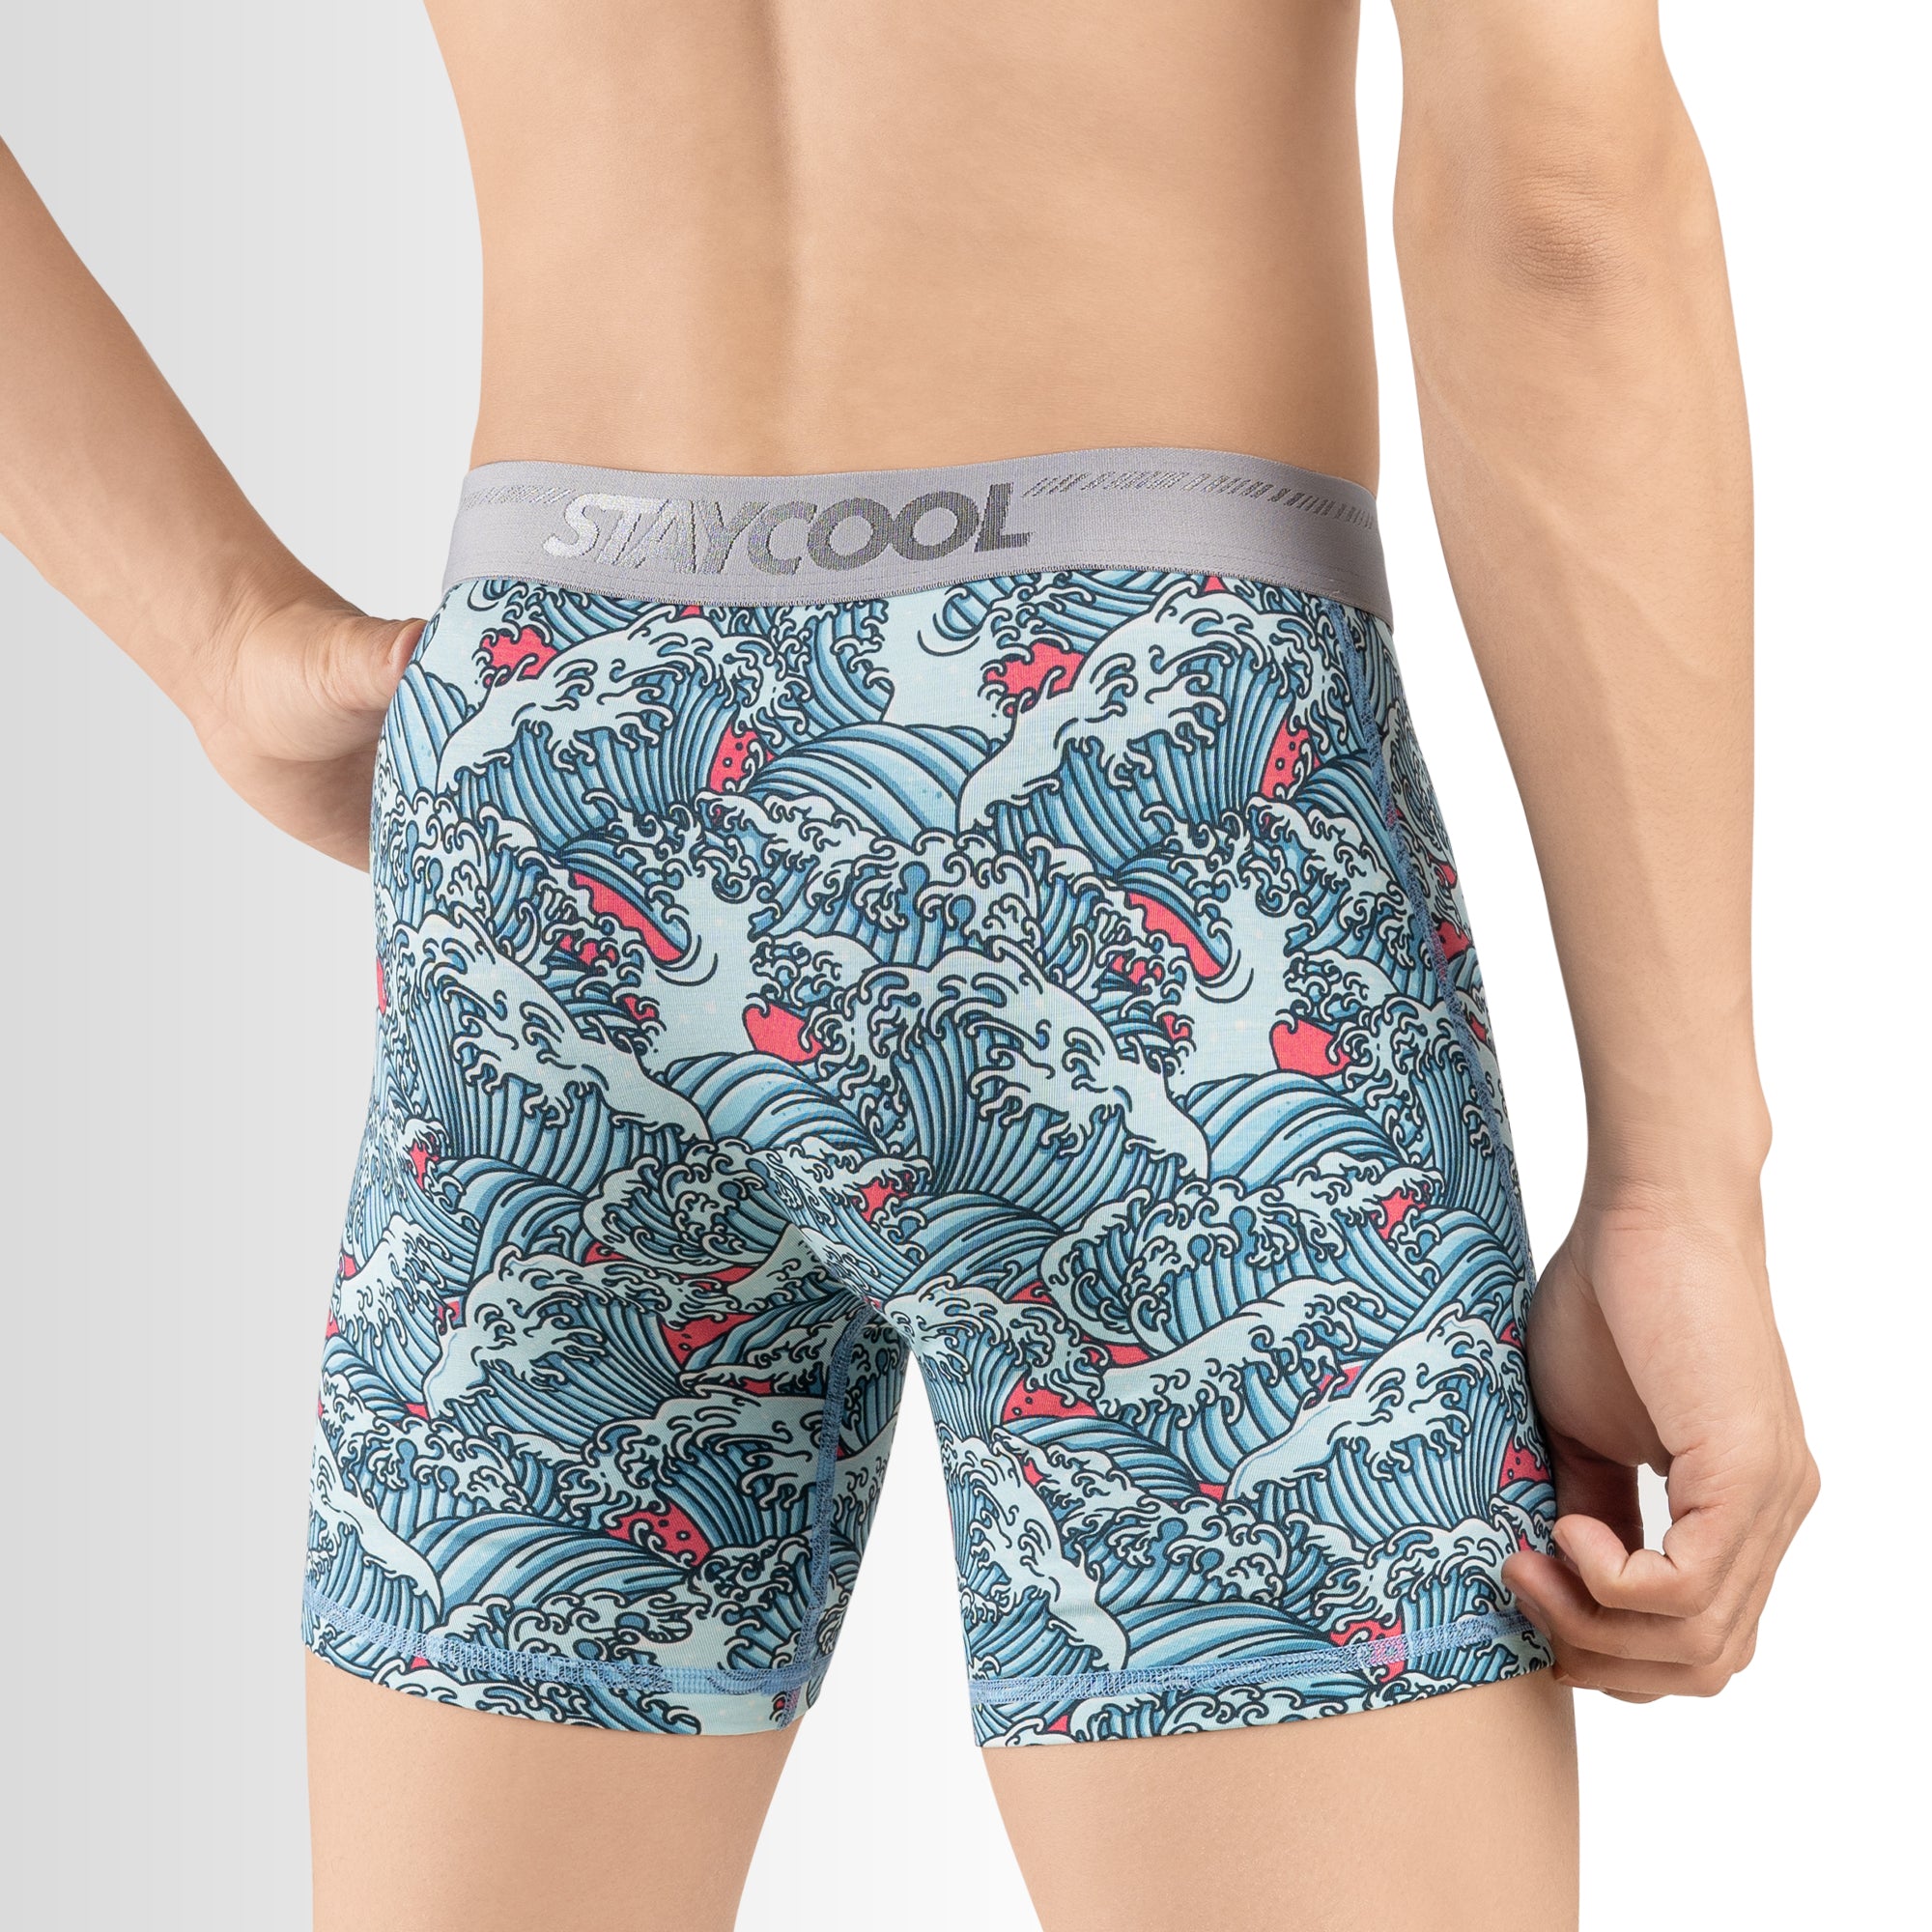 BOXER BRIEF - COOL WAVES